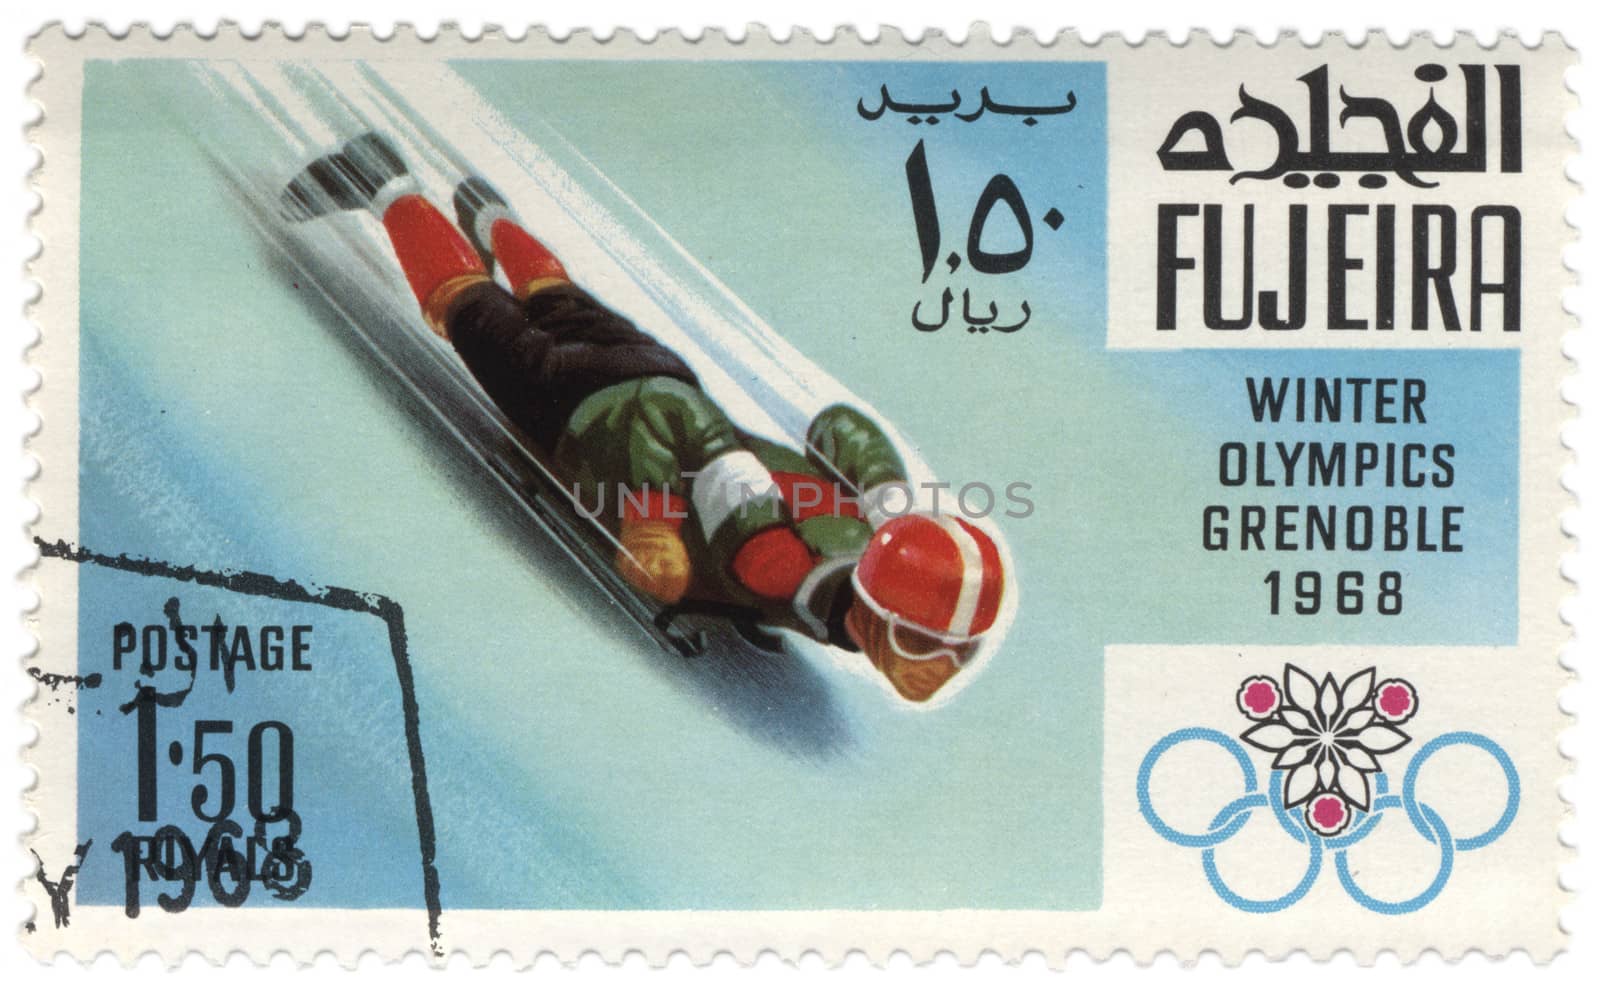 Toboggan at the Winter Olympics in Grenoble on postage stamp by wander